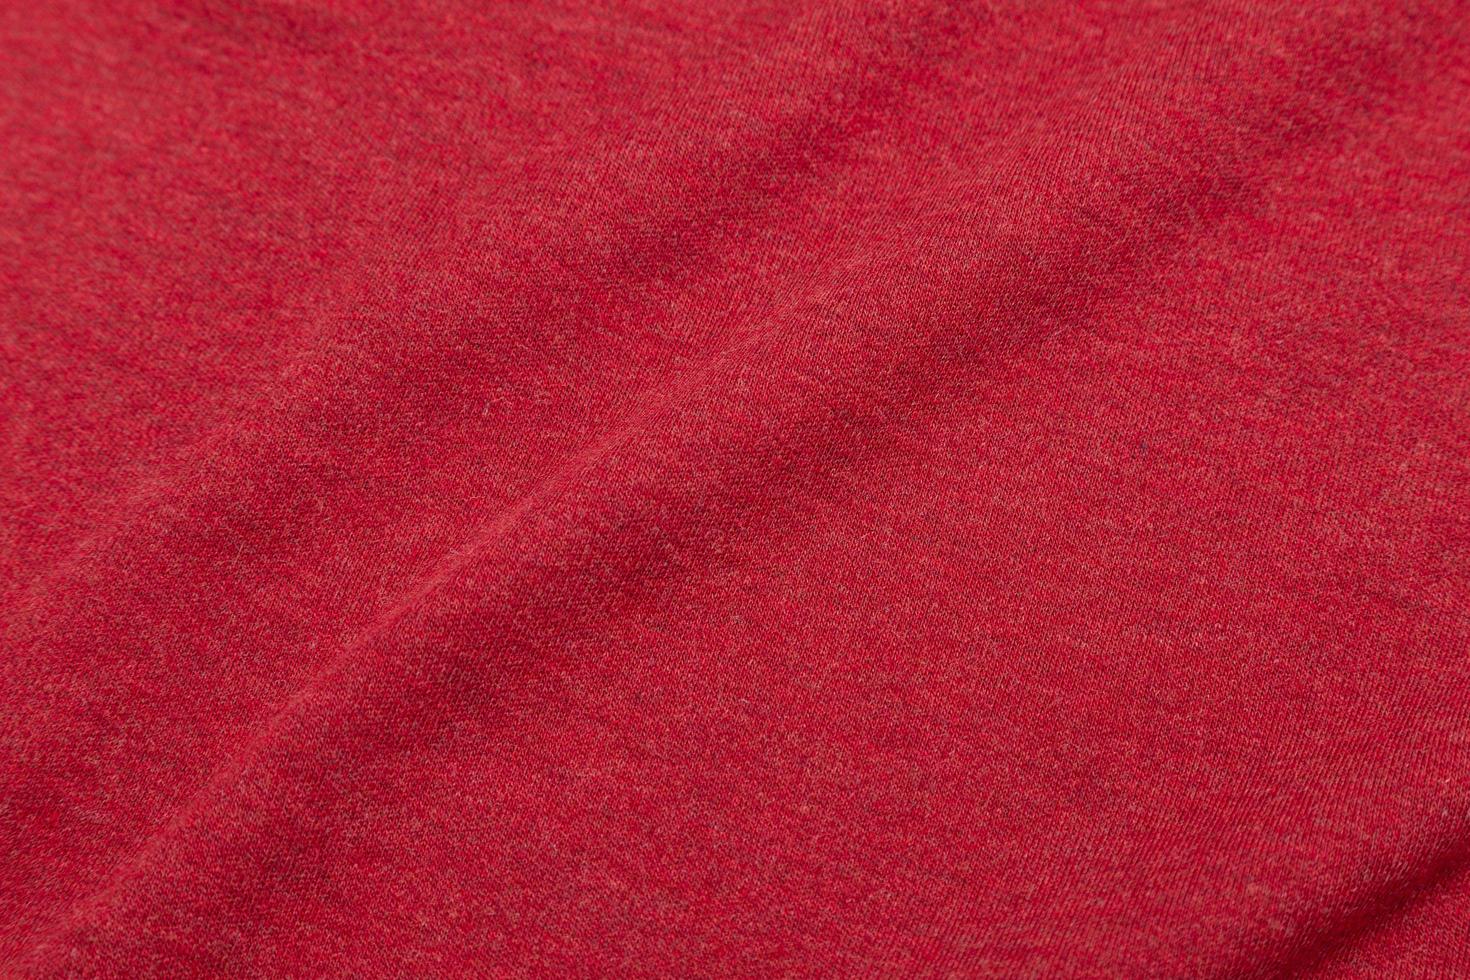 Red fabric texture photo